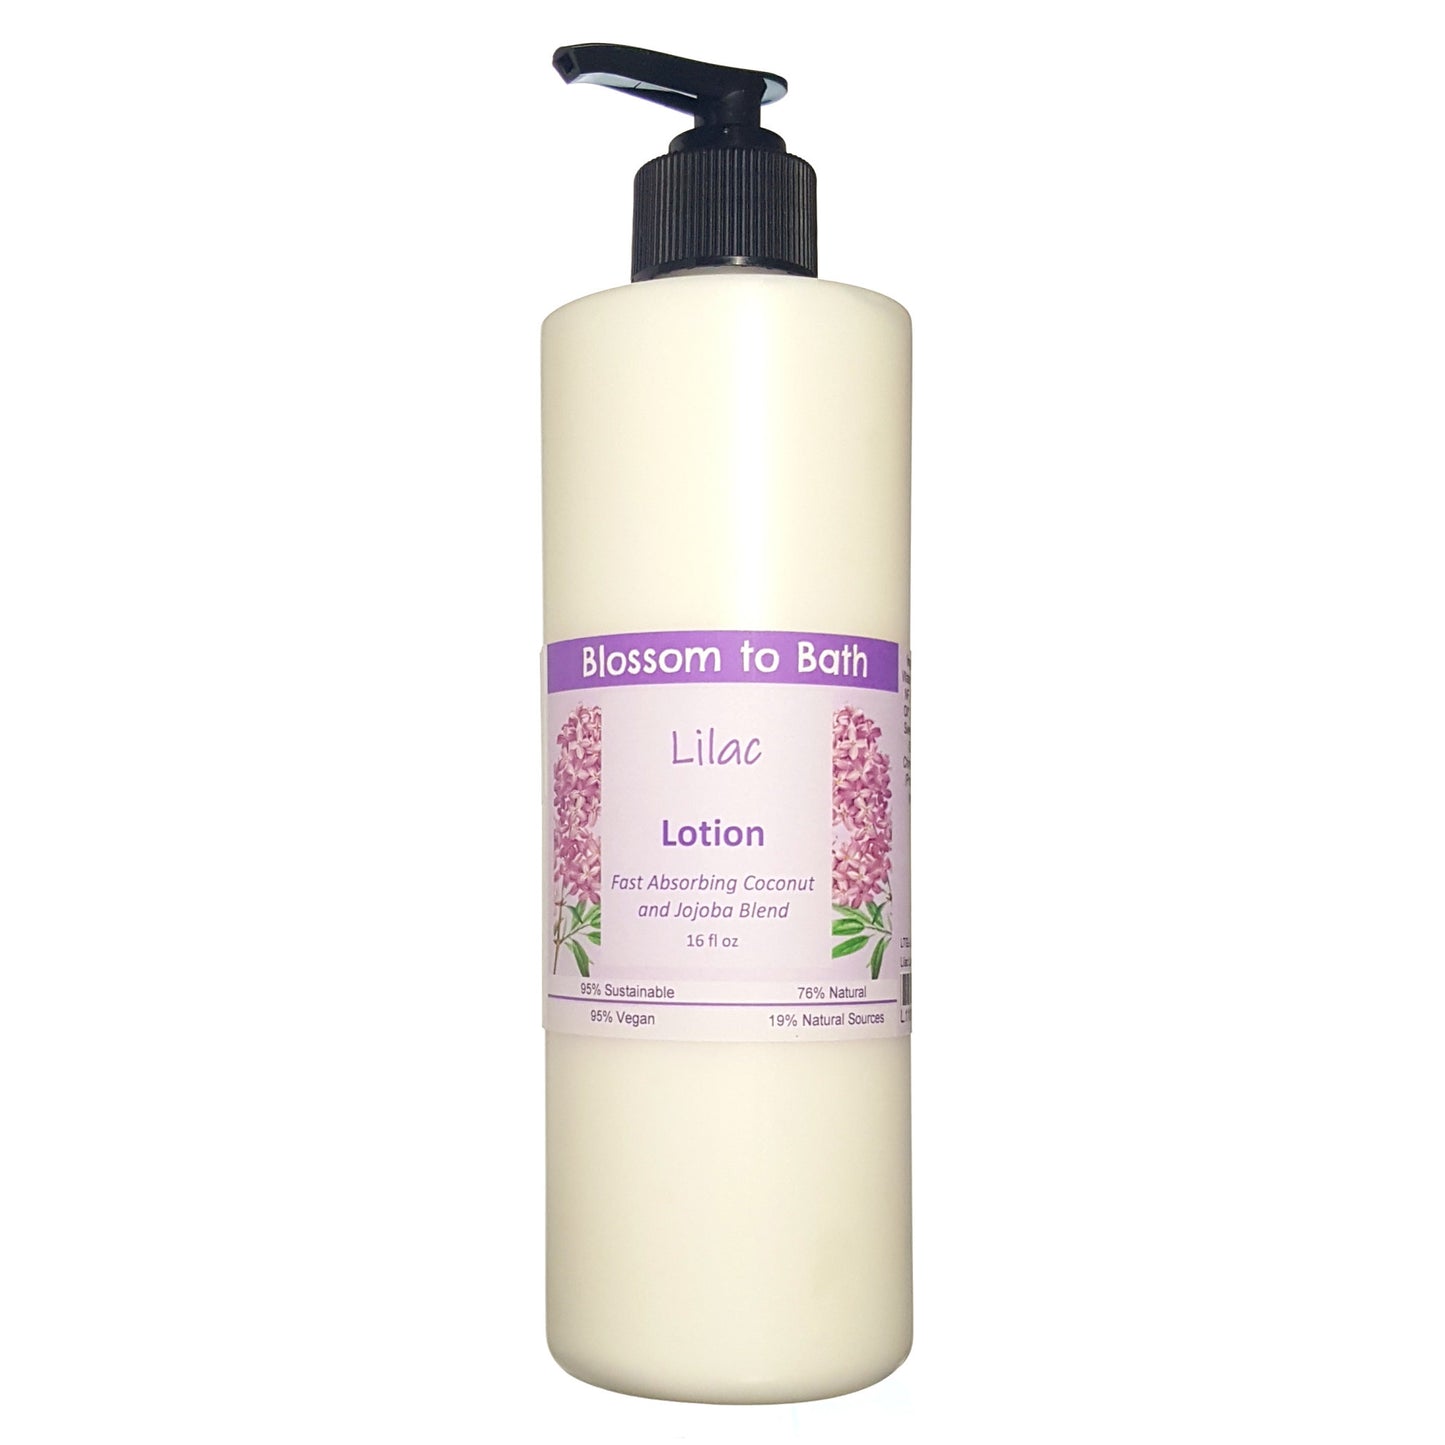 Buy Blossom to Bath Lilac Lotion from Flowersong Soap Studio.  Daily moisture luxury that soaks in quickly made with organic oils and butters that soften and smooth the skin  The scent of a freshly blooming lilac bush, the embodiment of spring flowers.